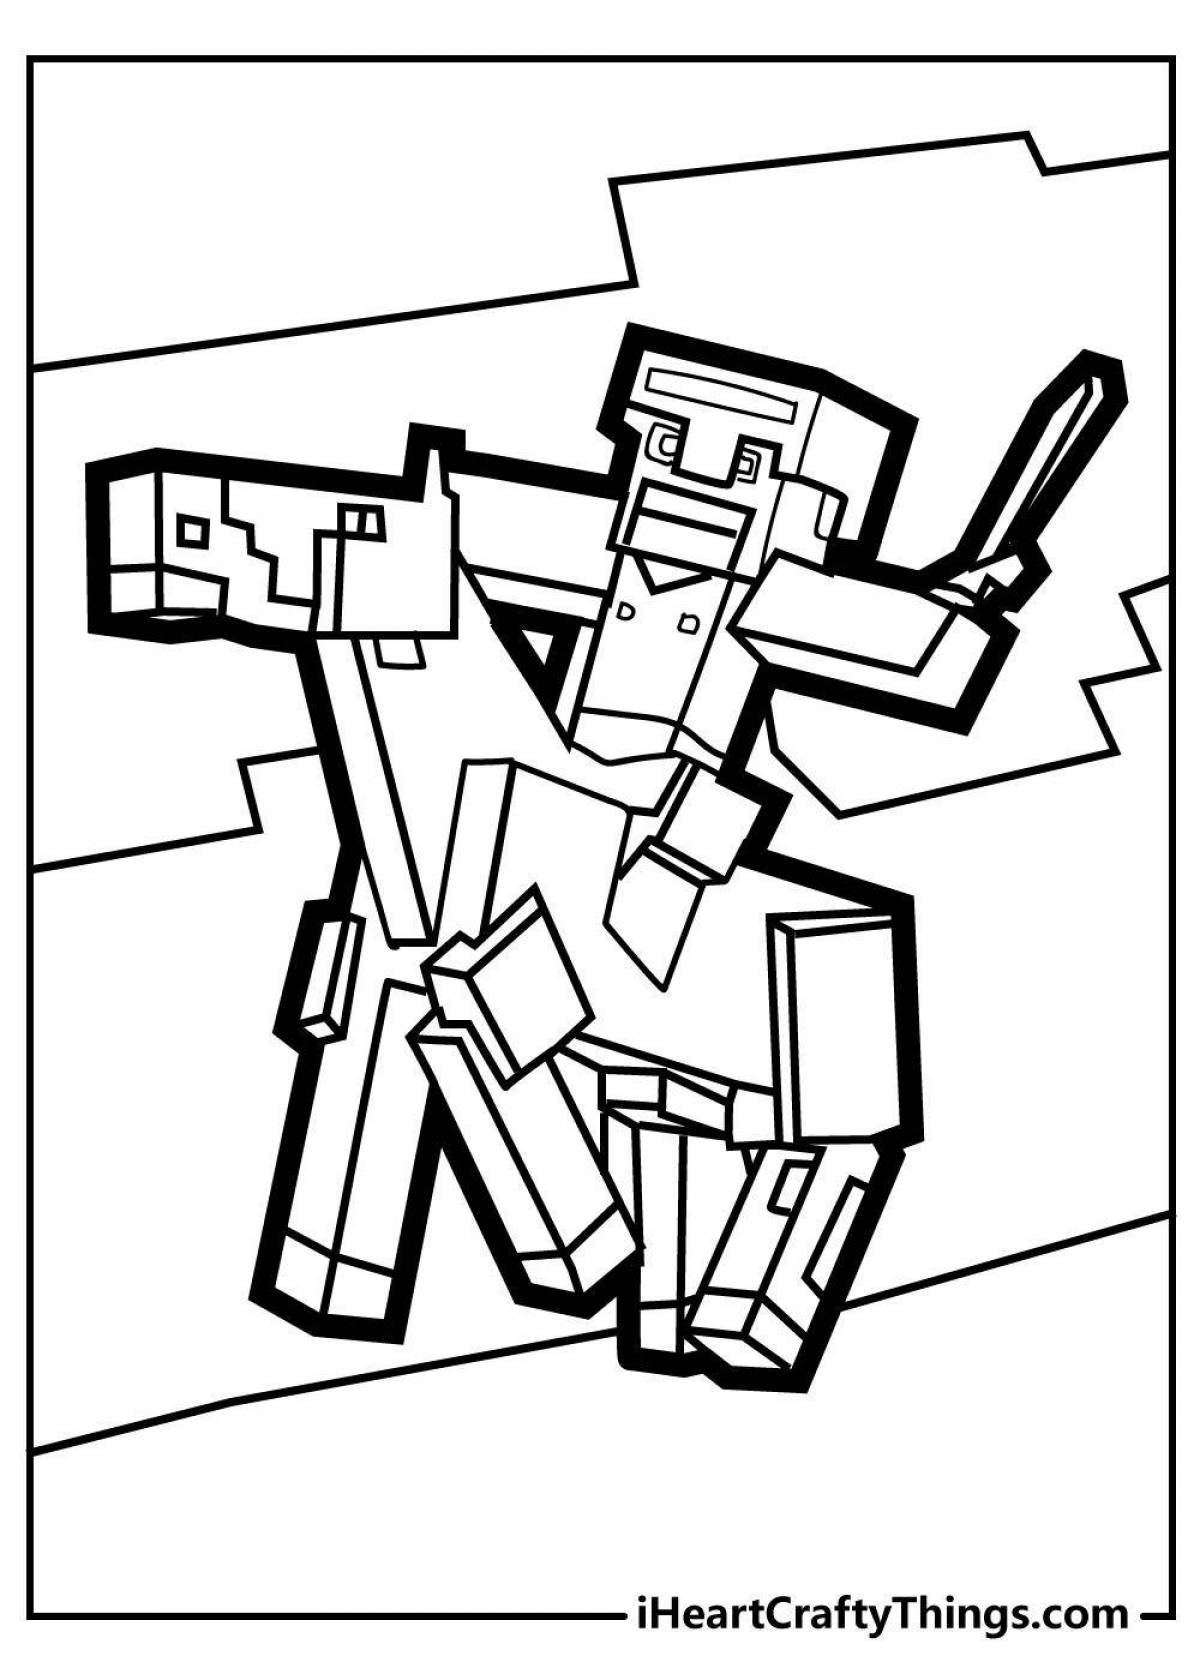 Vibrant minecraft bunny coloring page